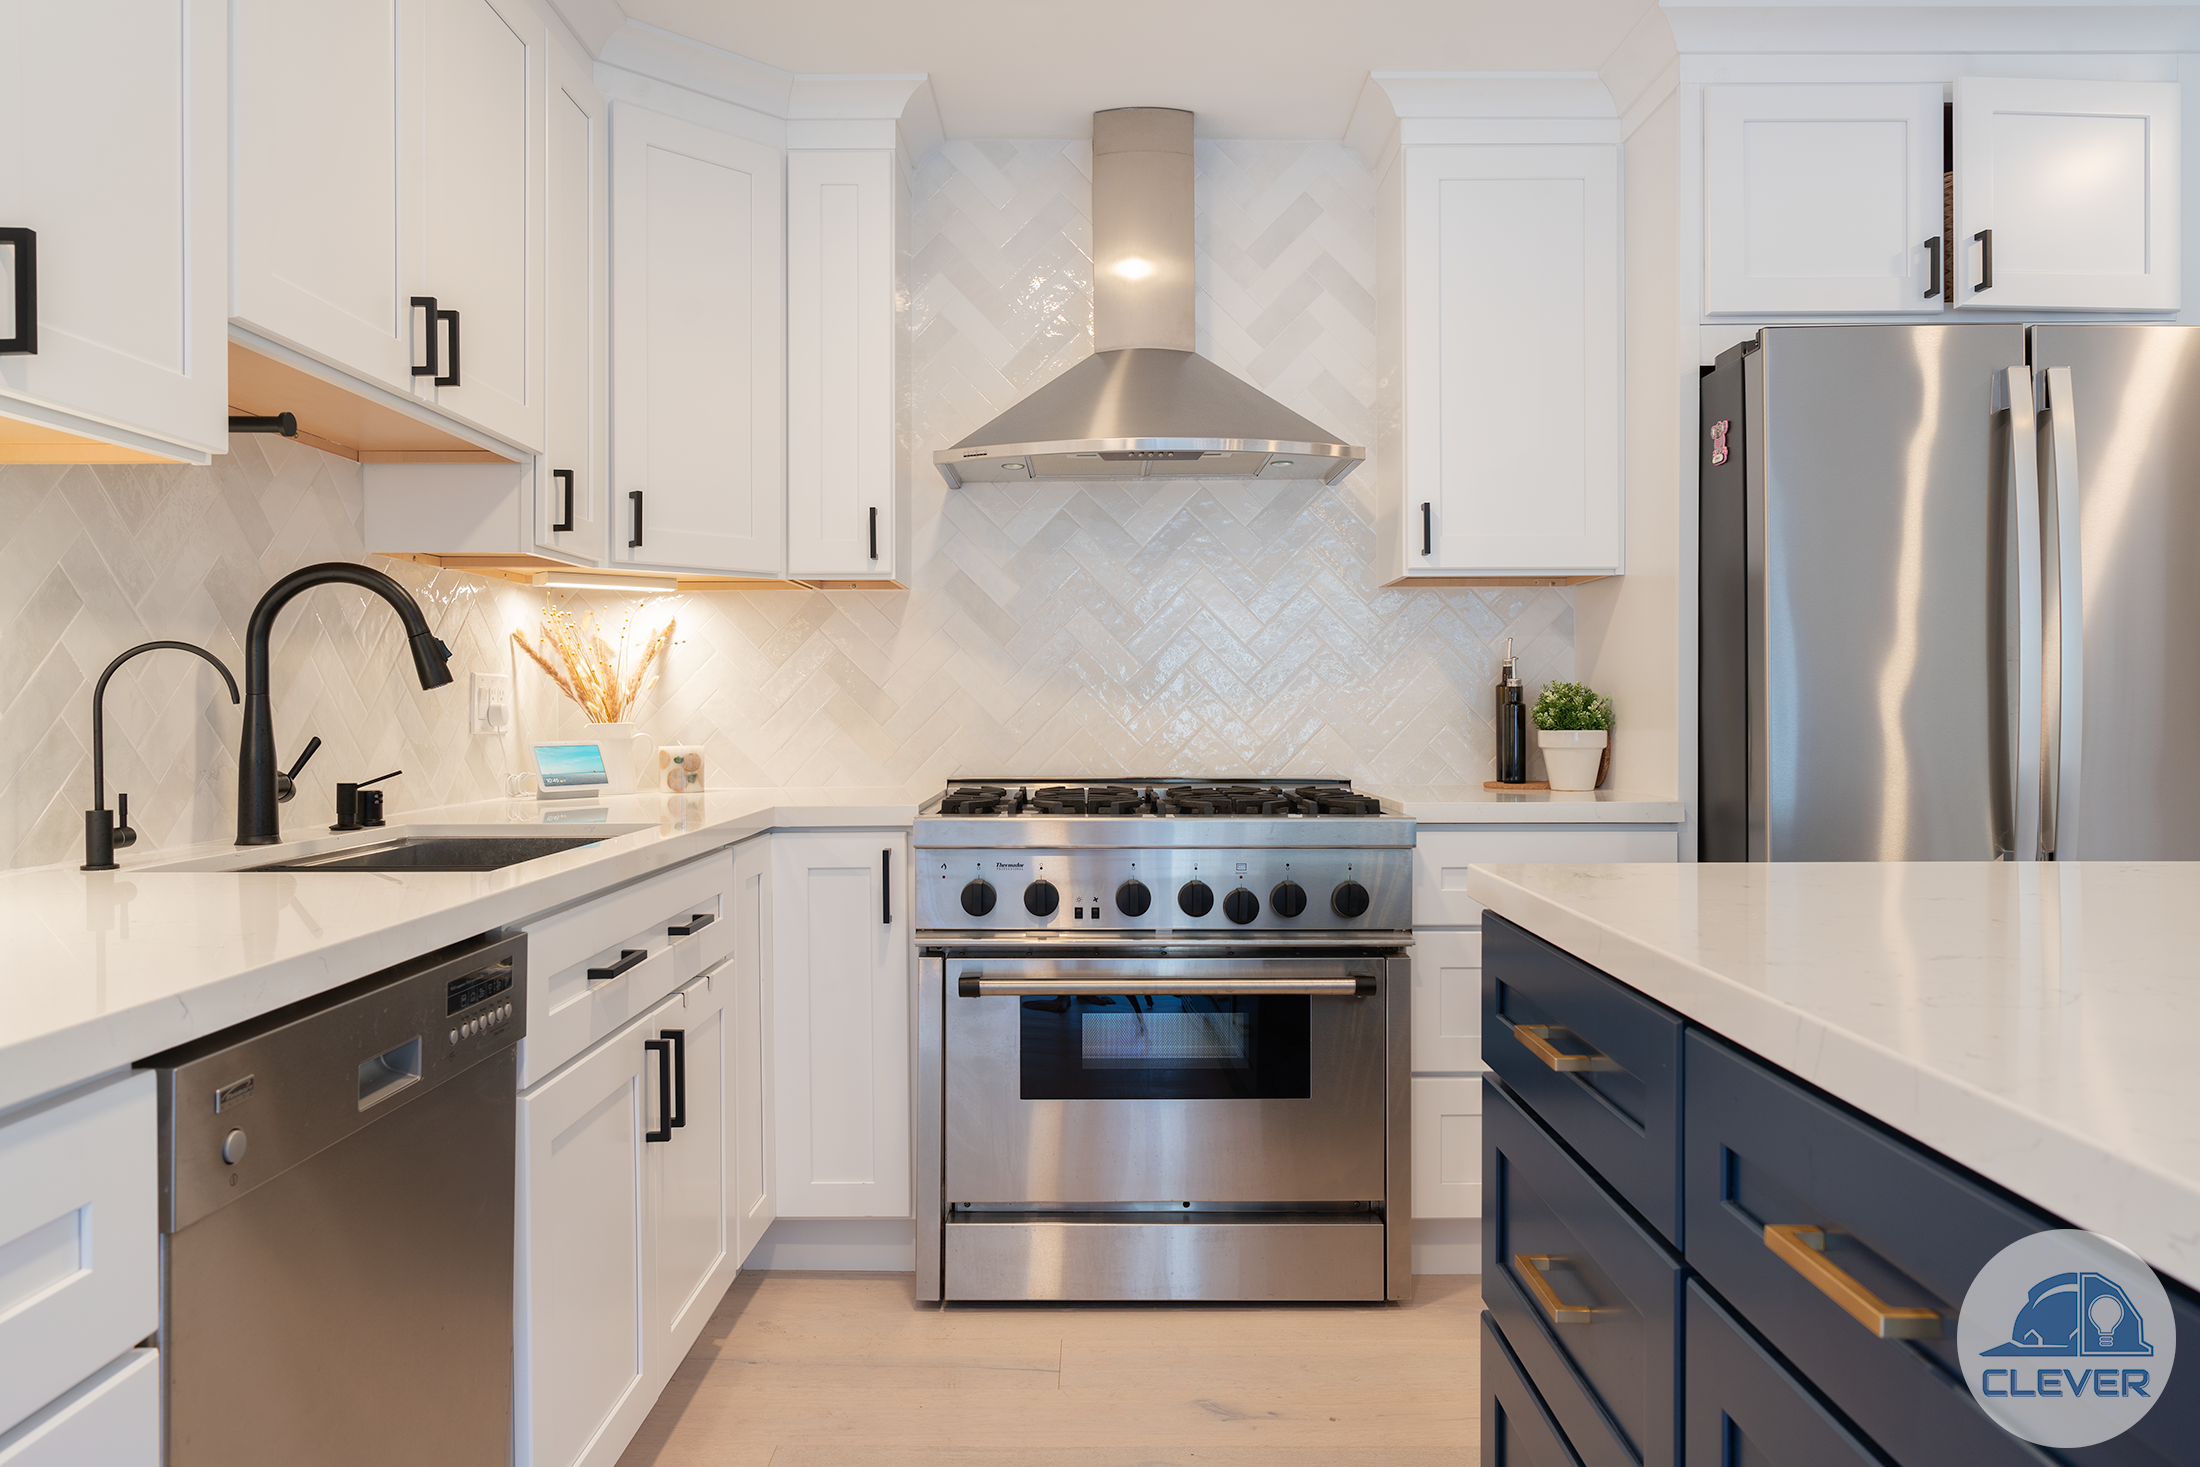 Saving Money on Your Kitchen Remodeling Project